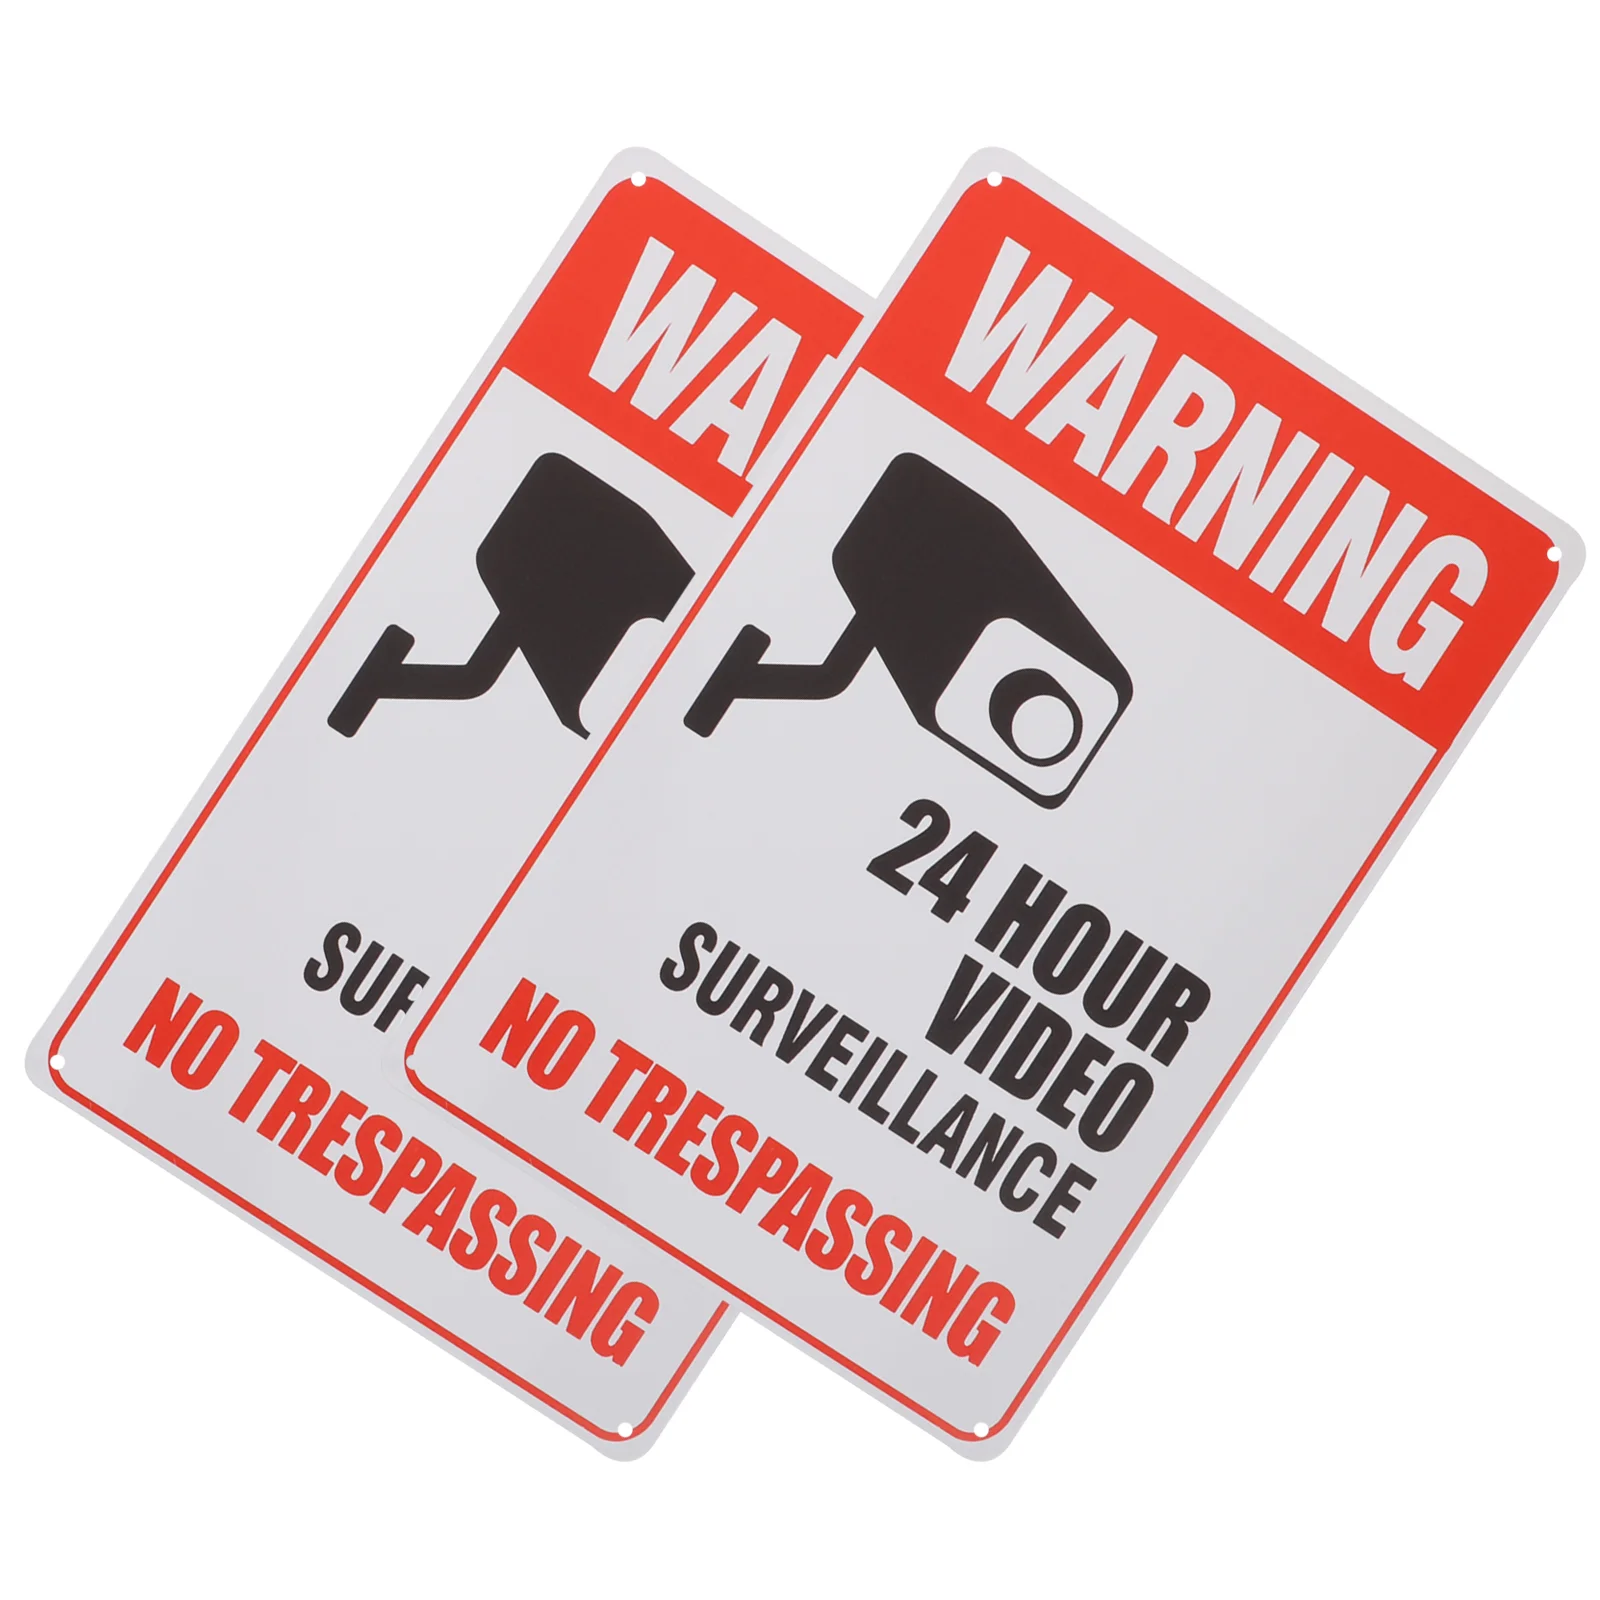 

2 Pcs Signs Video Surveillance Caution Wall Decoration No Trespassing Warning Iron 24 Hour Home